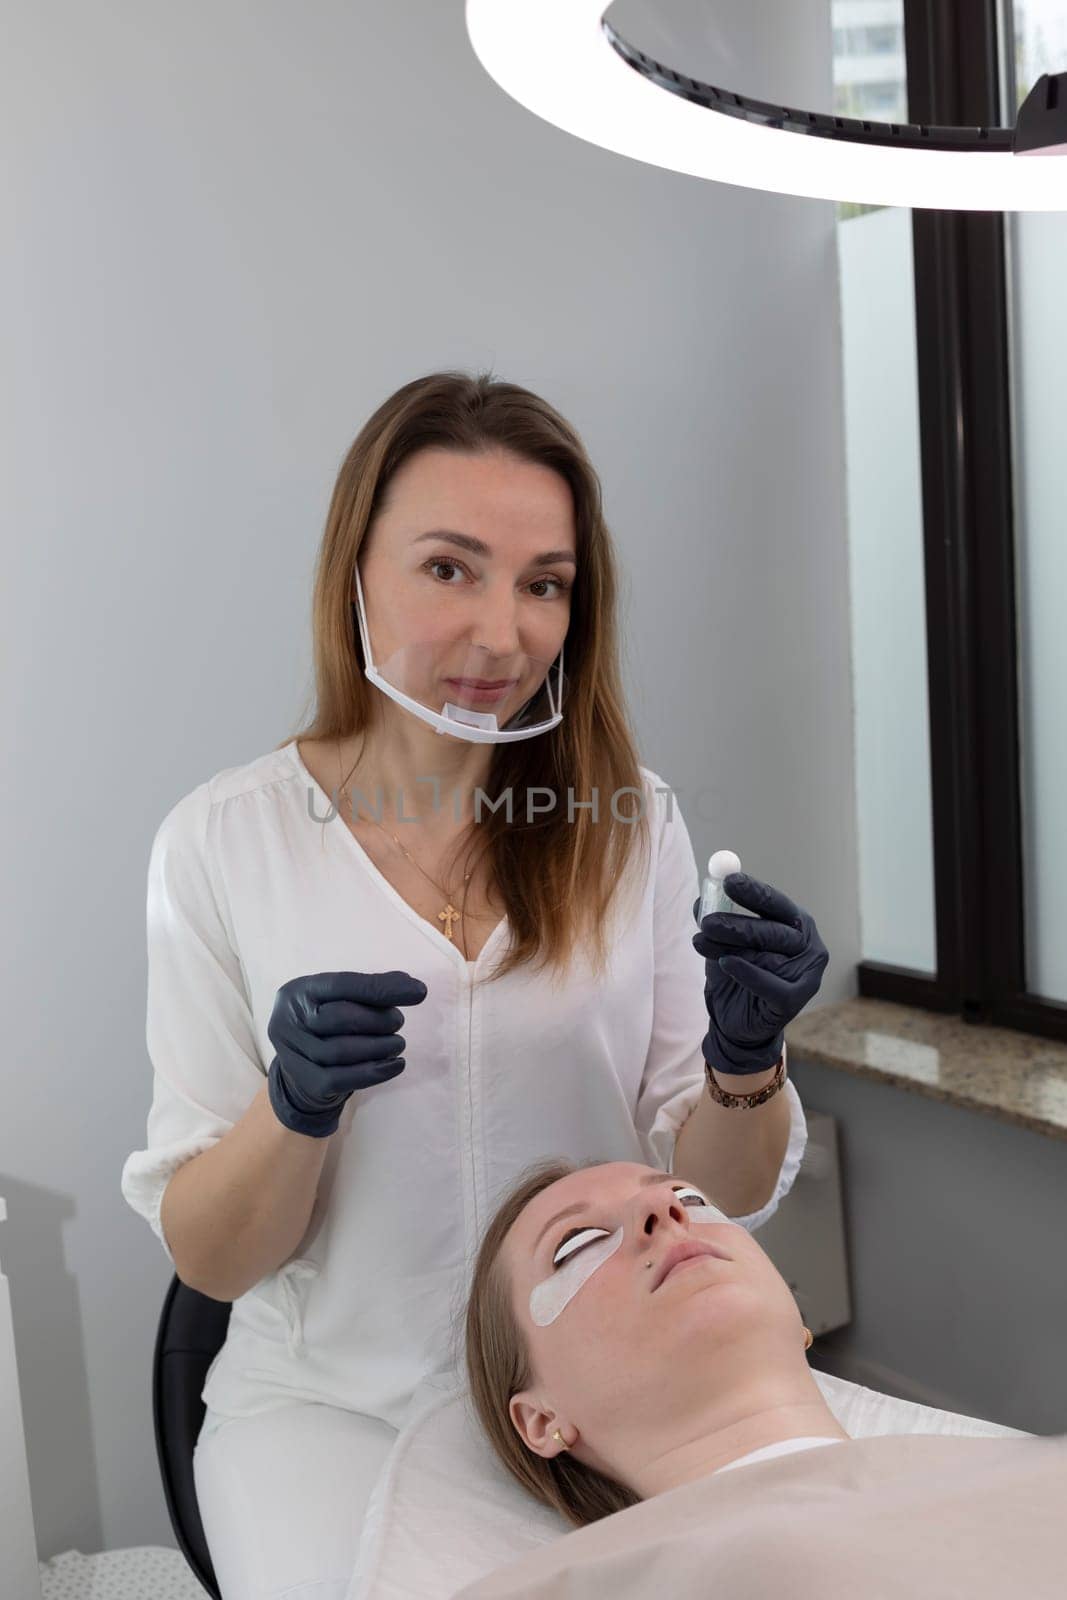 Beautician Holds Bottles With Lash Lift Lotion For Eyelash Lamination Treatment Procedure In Beauty Salon. Curling, Staining, Extension Procedures For Lashes. Vertical Plane. High quality photo